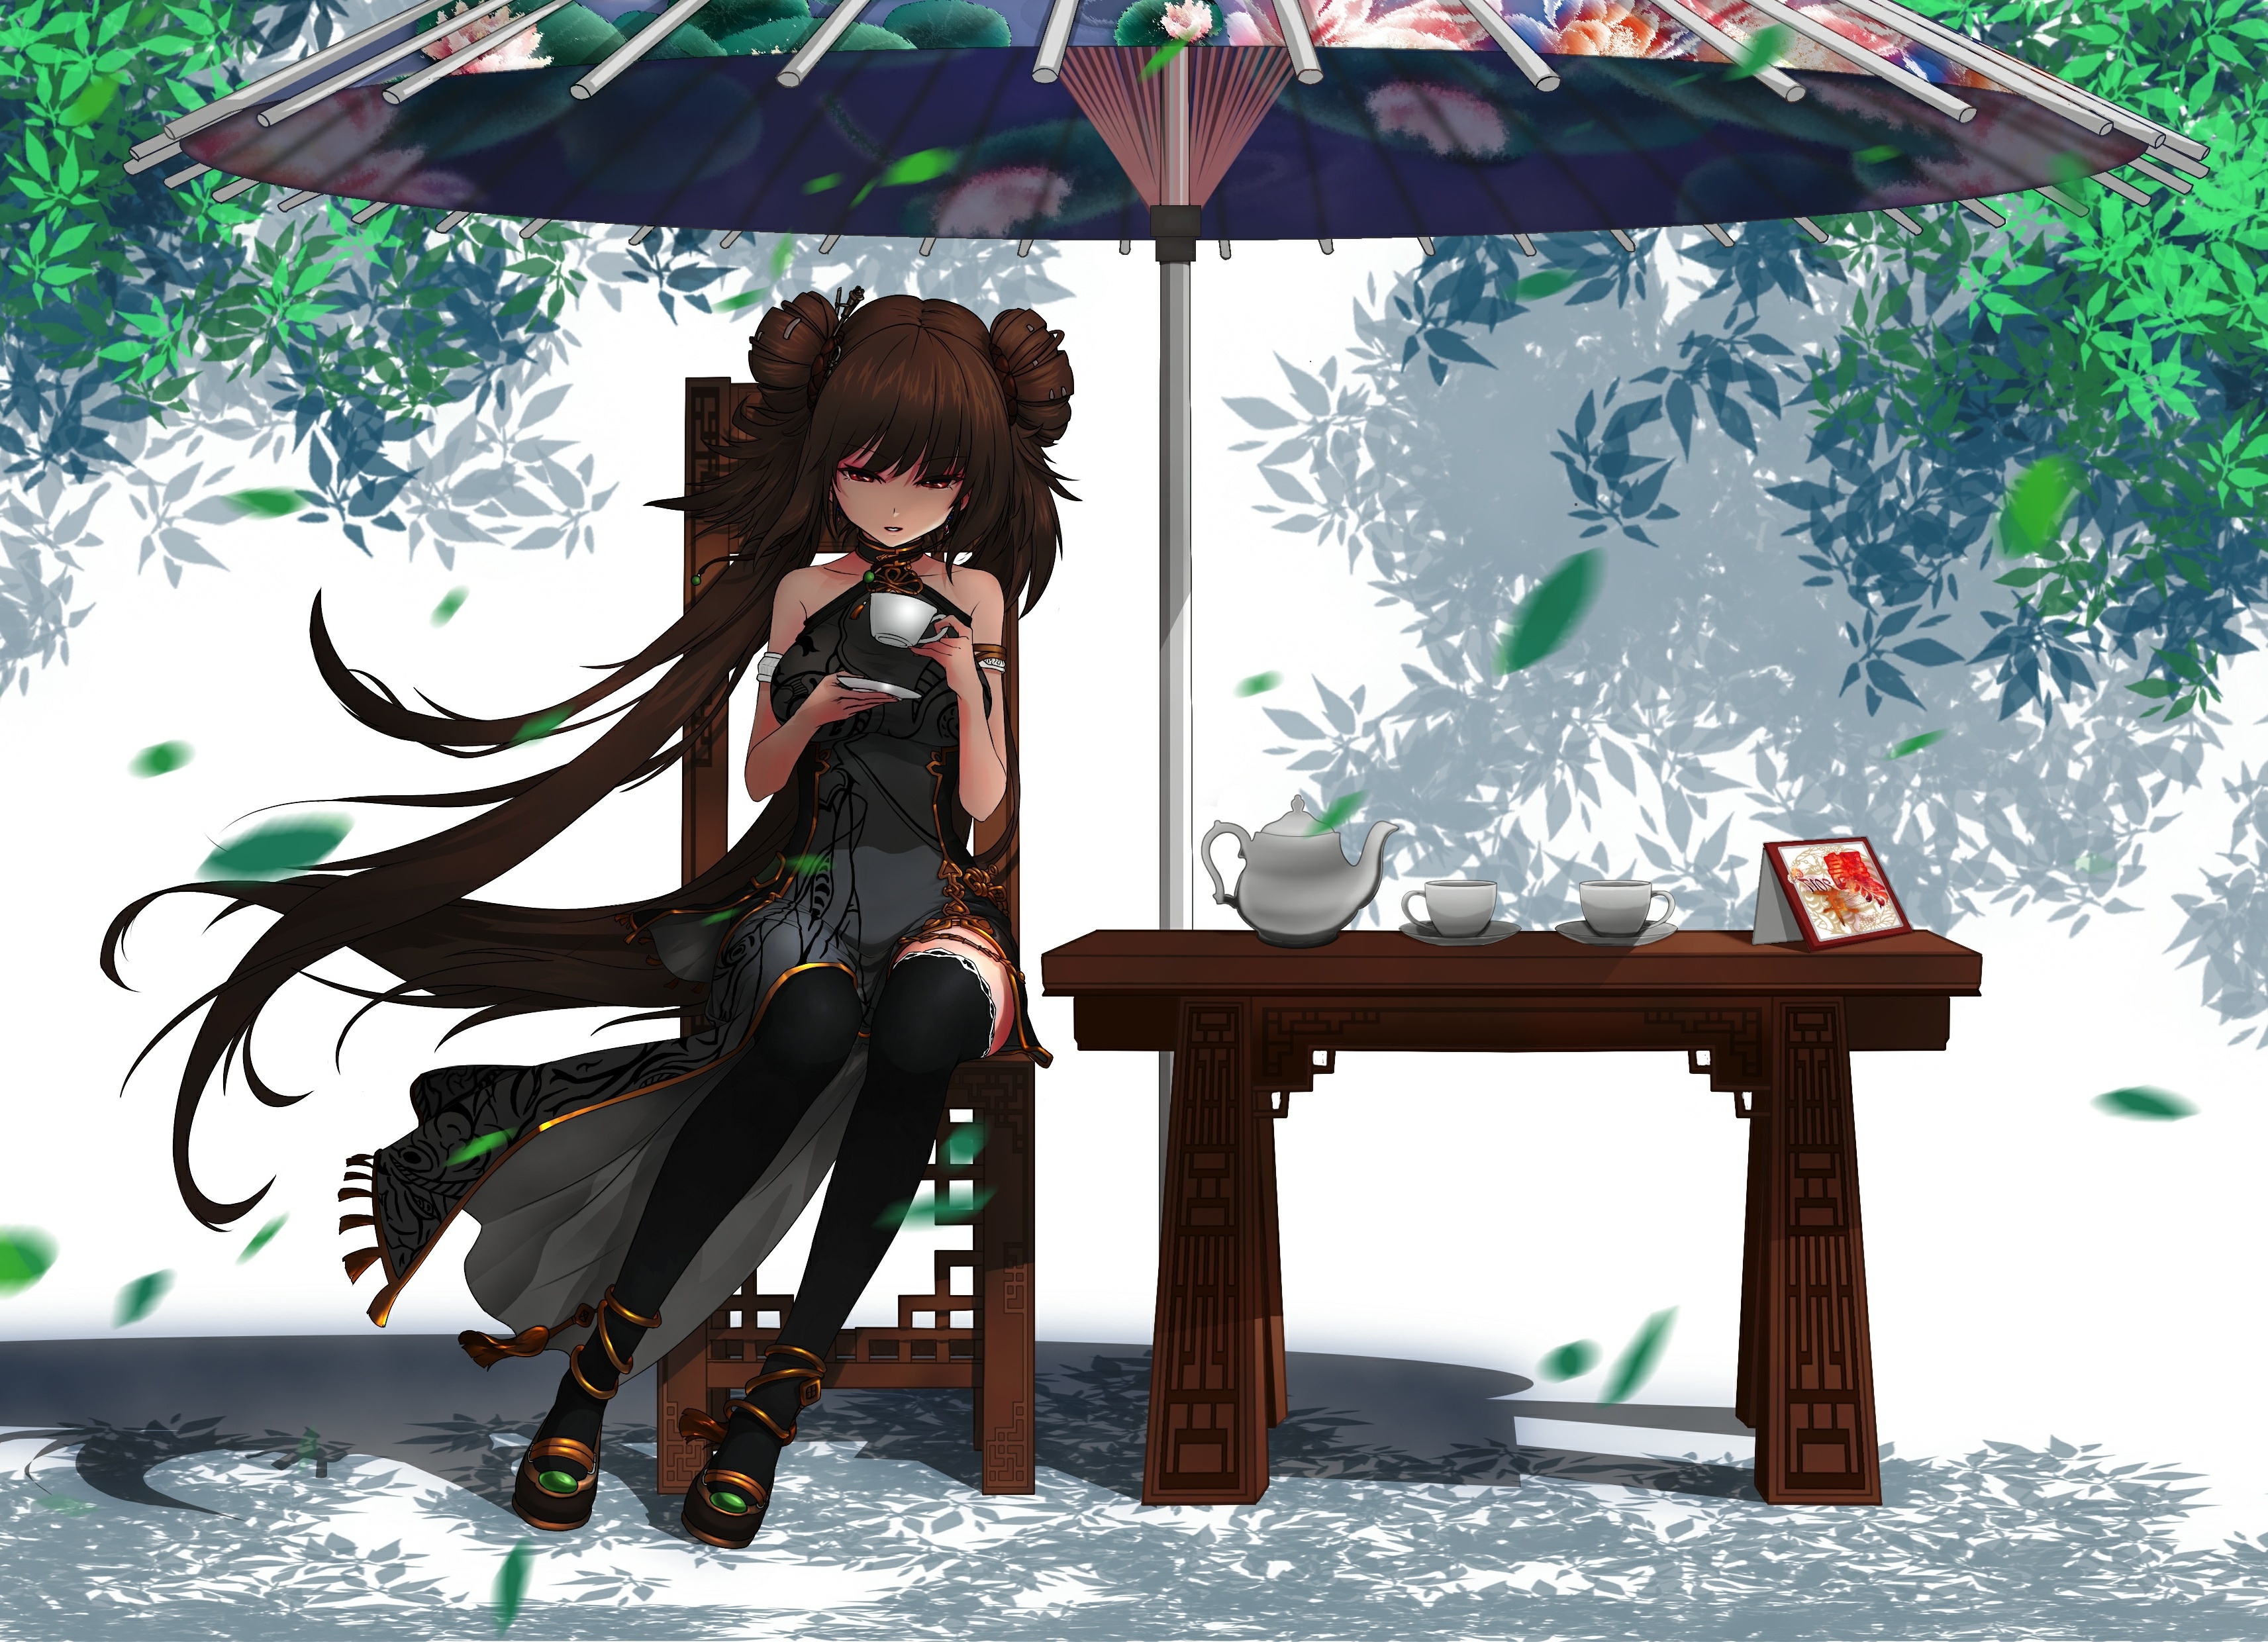 Wallpaper Anime Girl, Sitting, Dungeon And Fighter, Coffee, Brown Hair, Anime Style:3425x2480